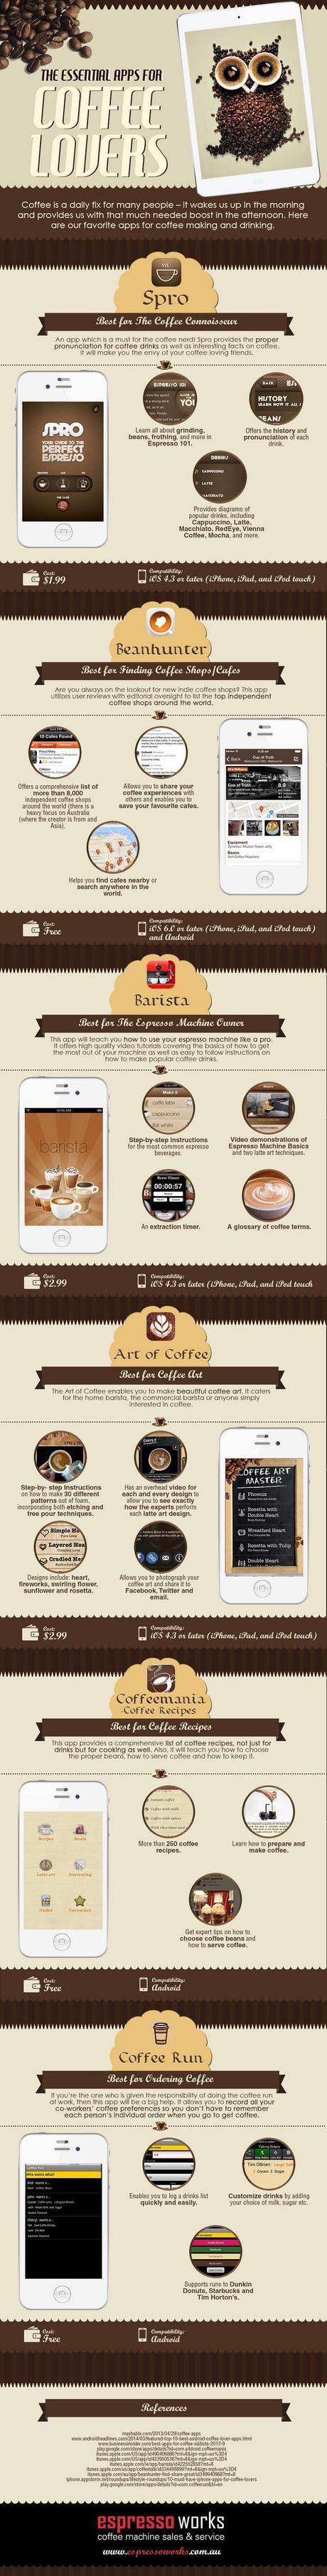 coffee-apps-infographic